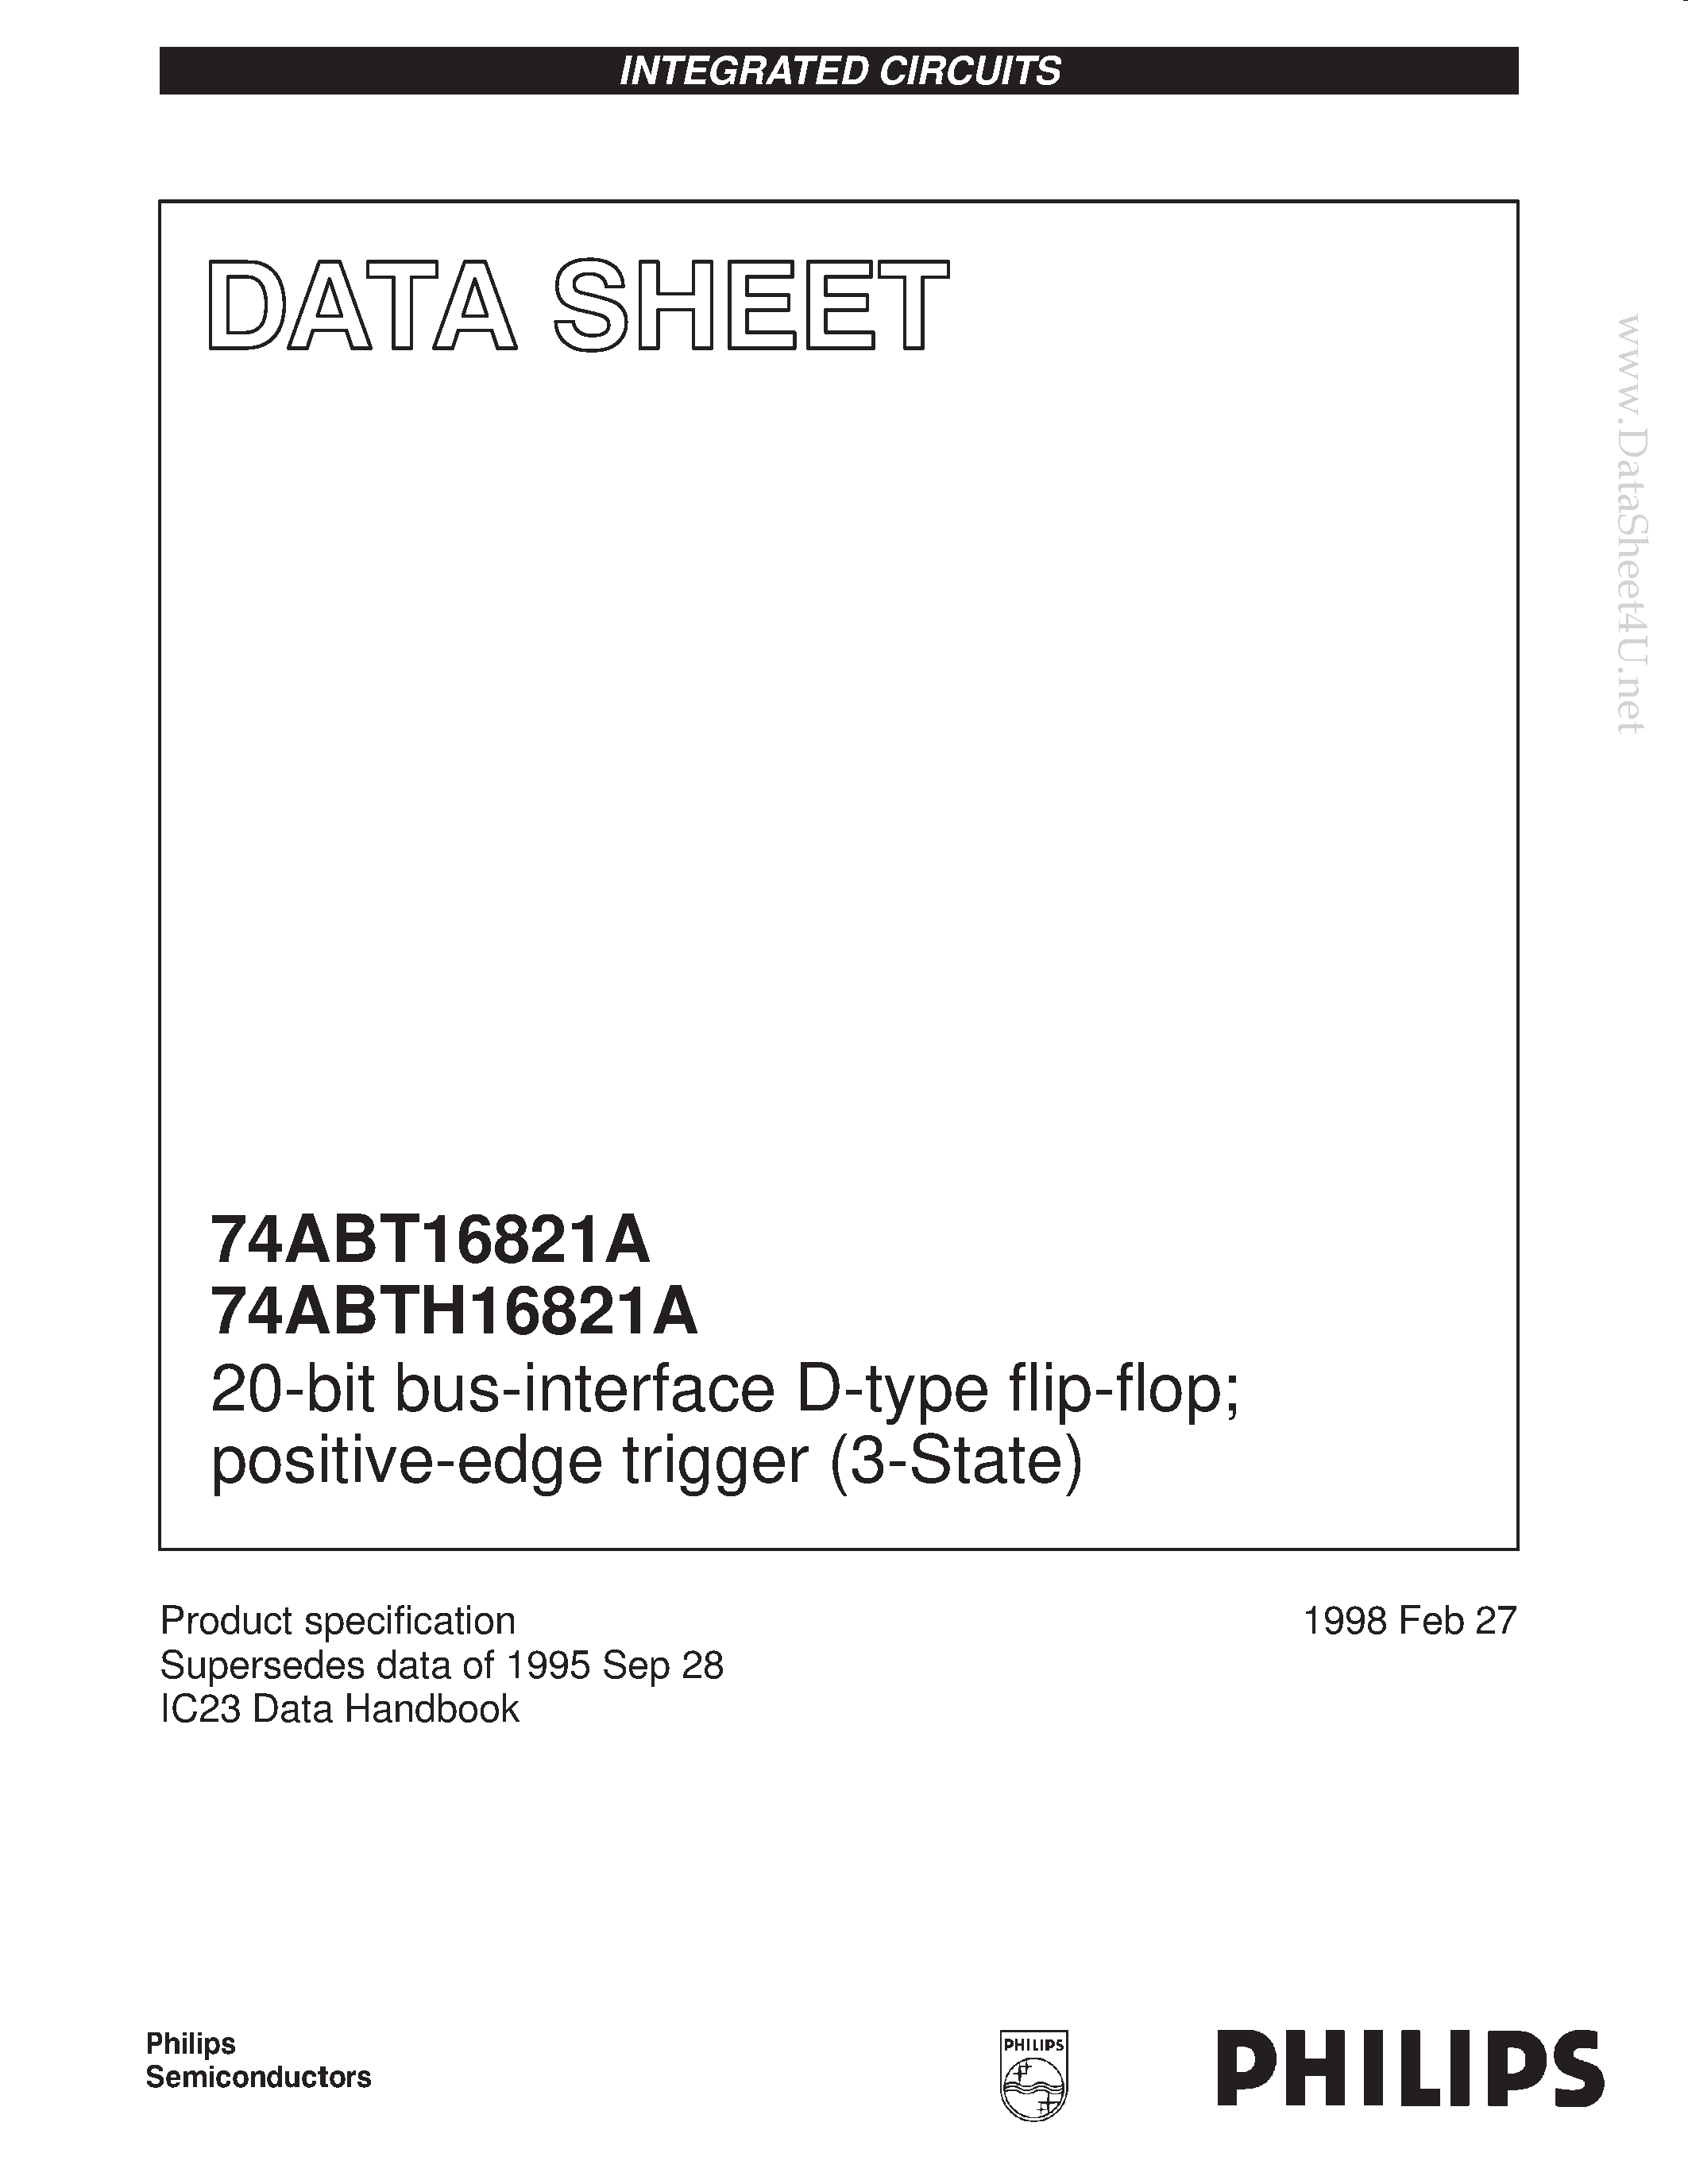 Datasheet 74ABTH16821A - 20-bit bus-interface D-type flip-flop; positive-edge trigger 3-State page 1